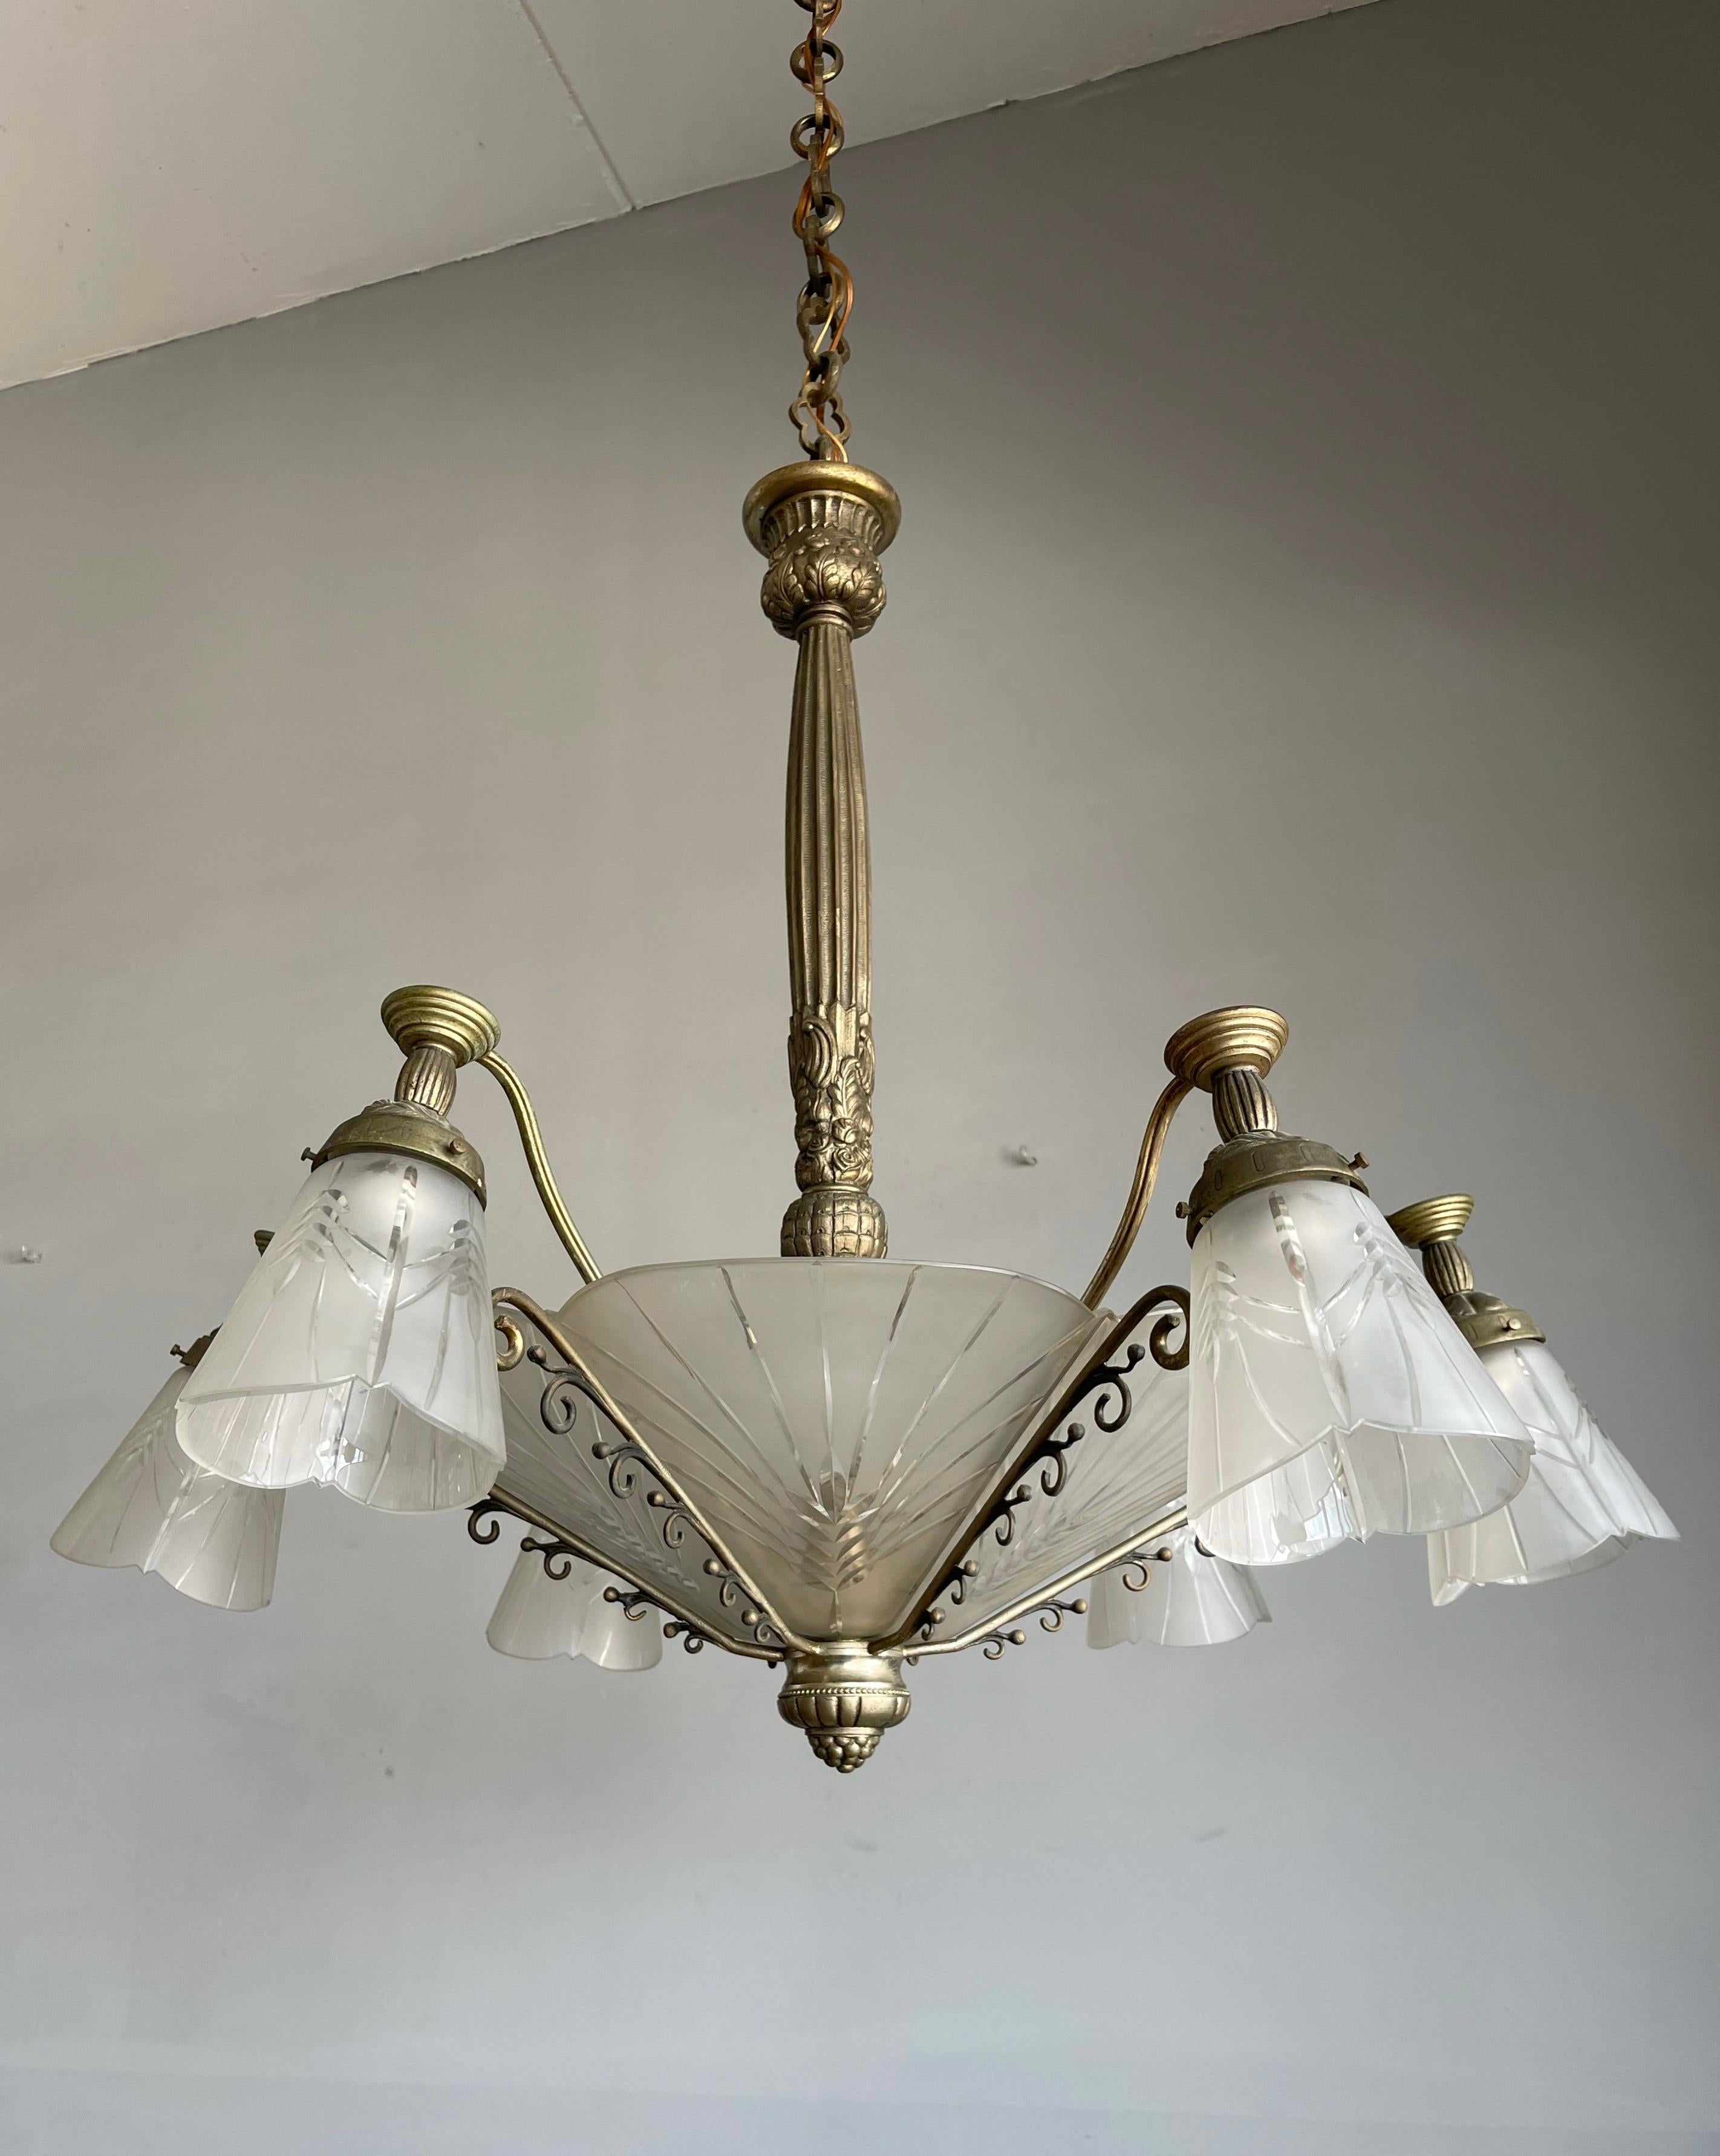 Another bargain for the collectors of top quality Art Deco pendants.

This early 1900s, practical size, bronze and engraved glass 9-light chandelier with an etched flower theme, is probably made by one of France's finest when it comes to Art Deco